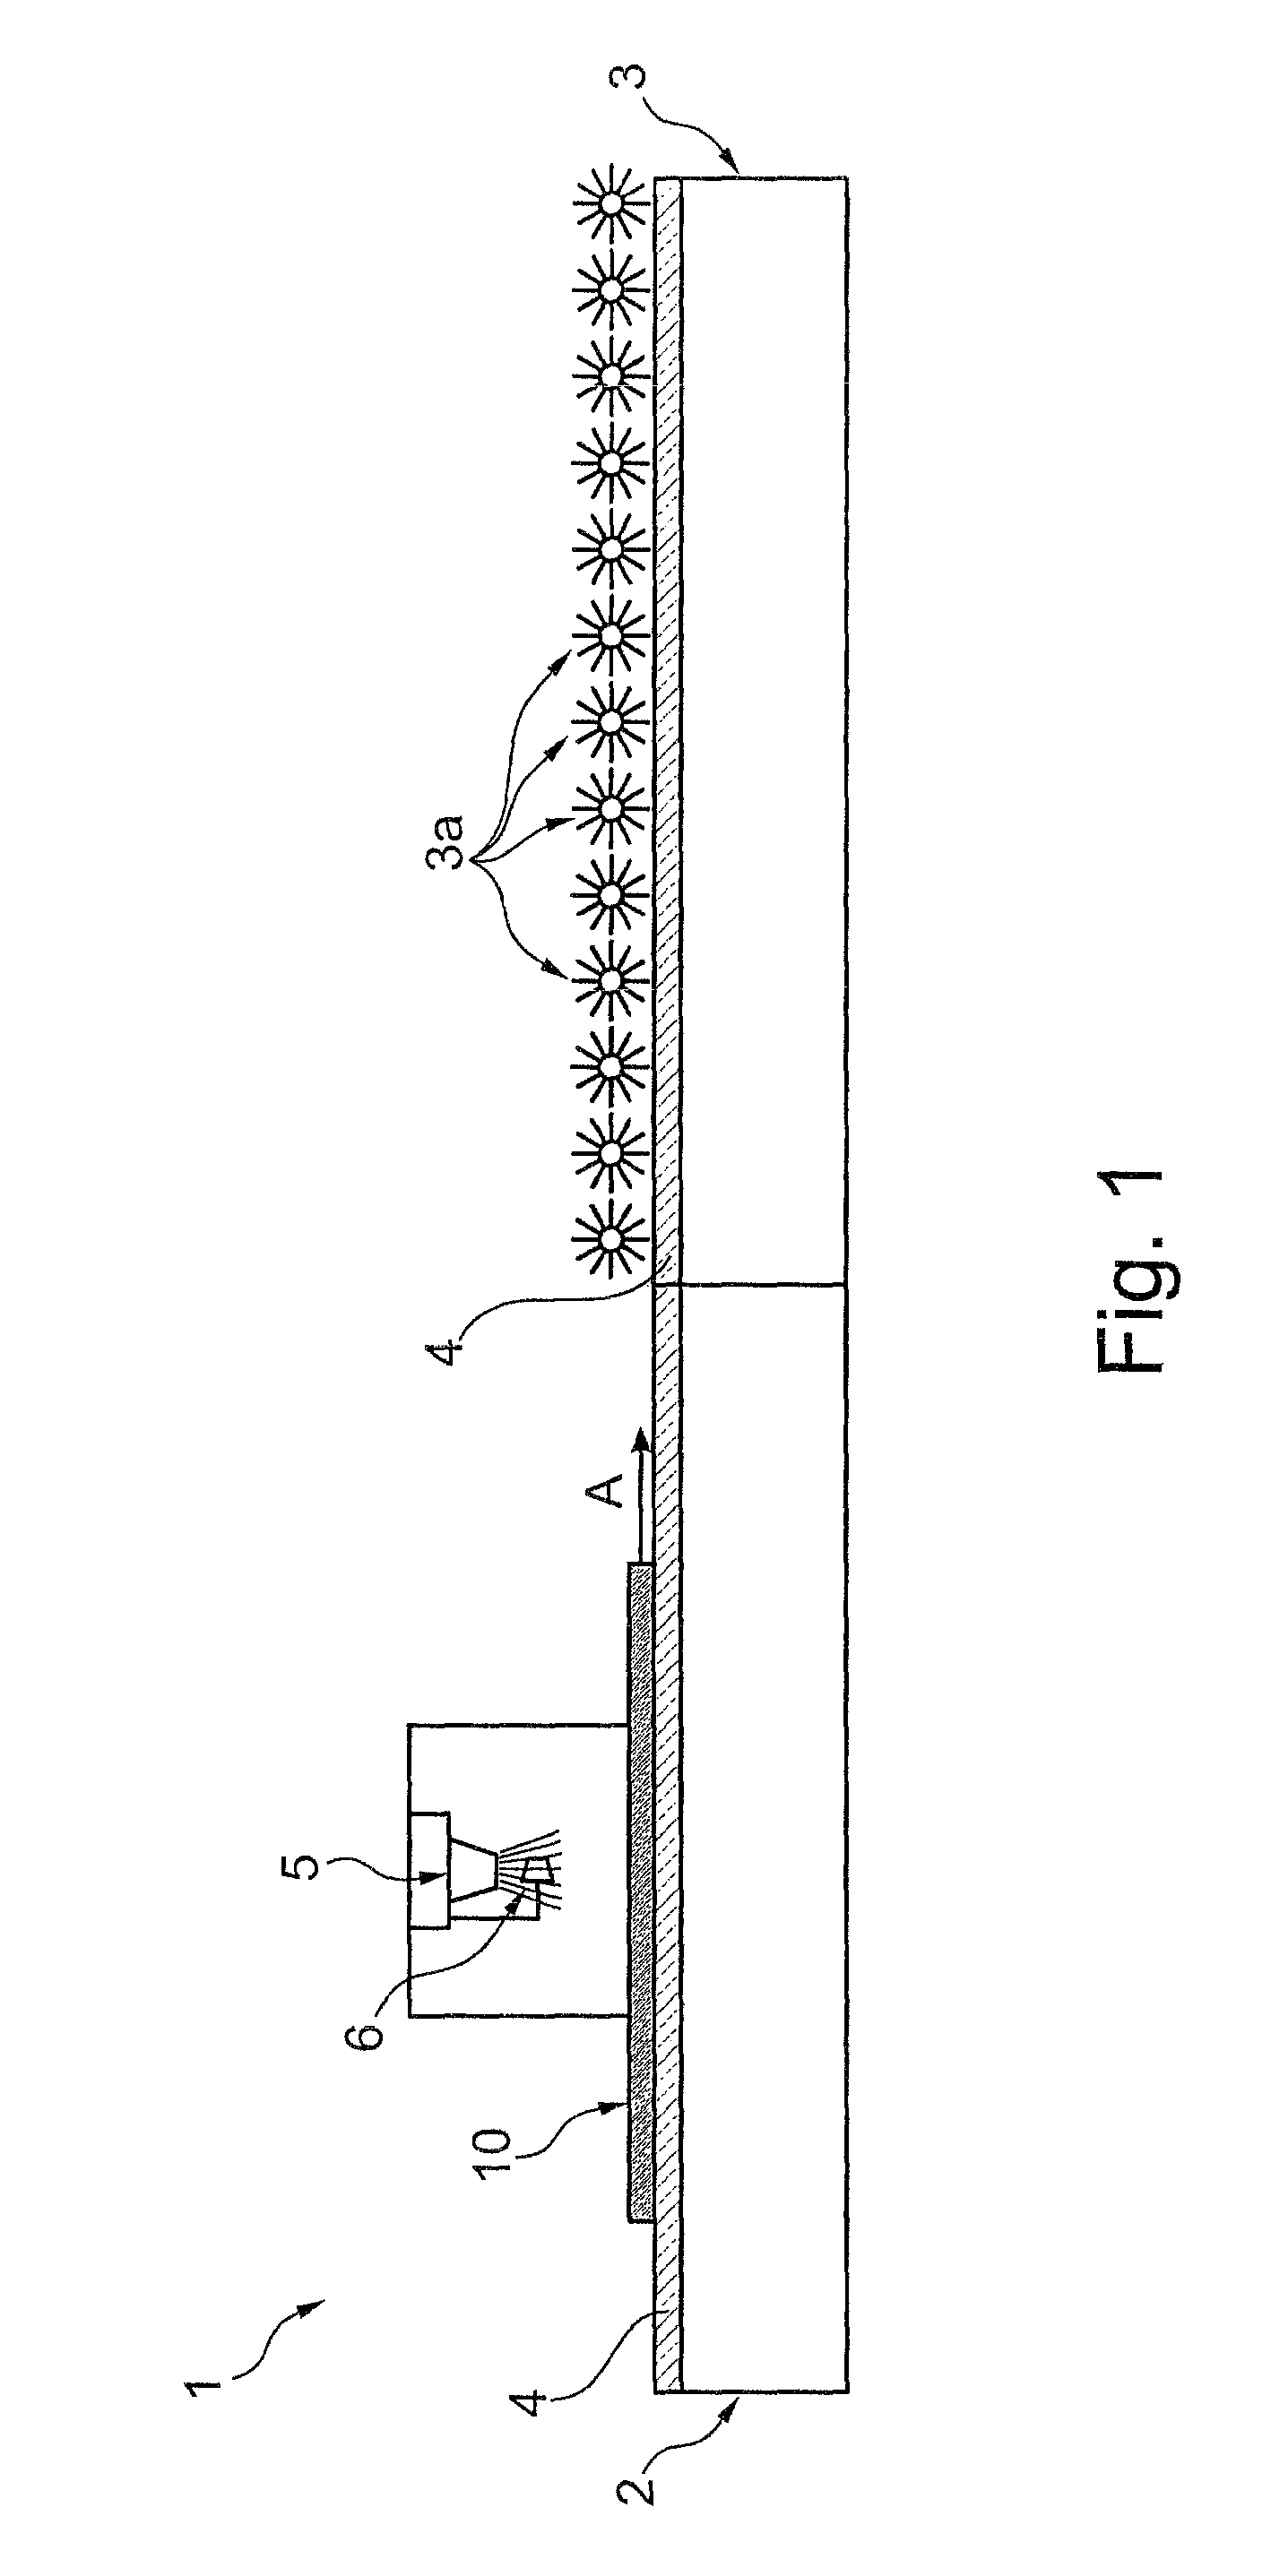 Method and apparatus for the photopolymerization and the washing in series of digital printing plates for flexography